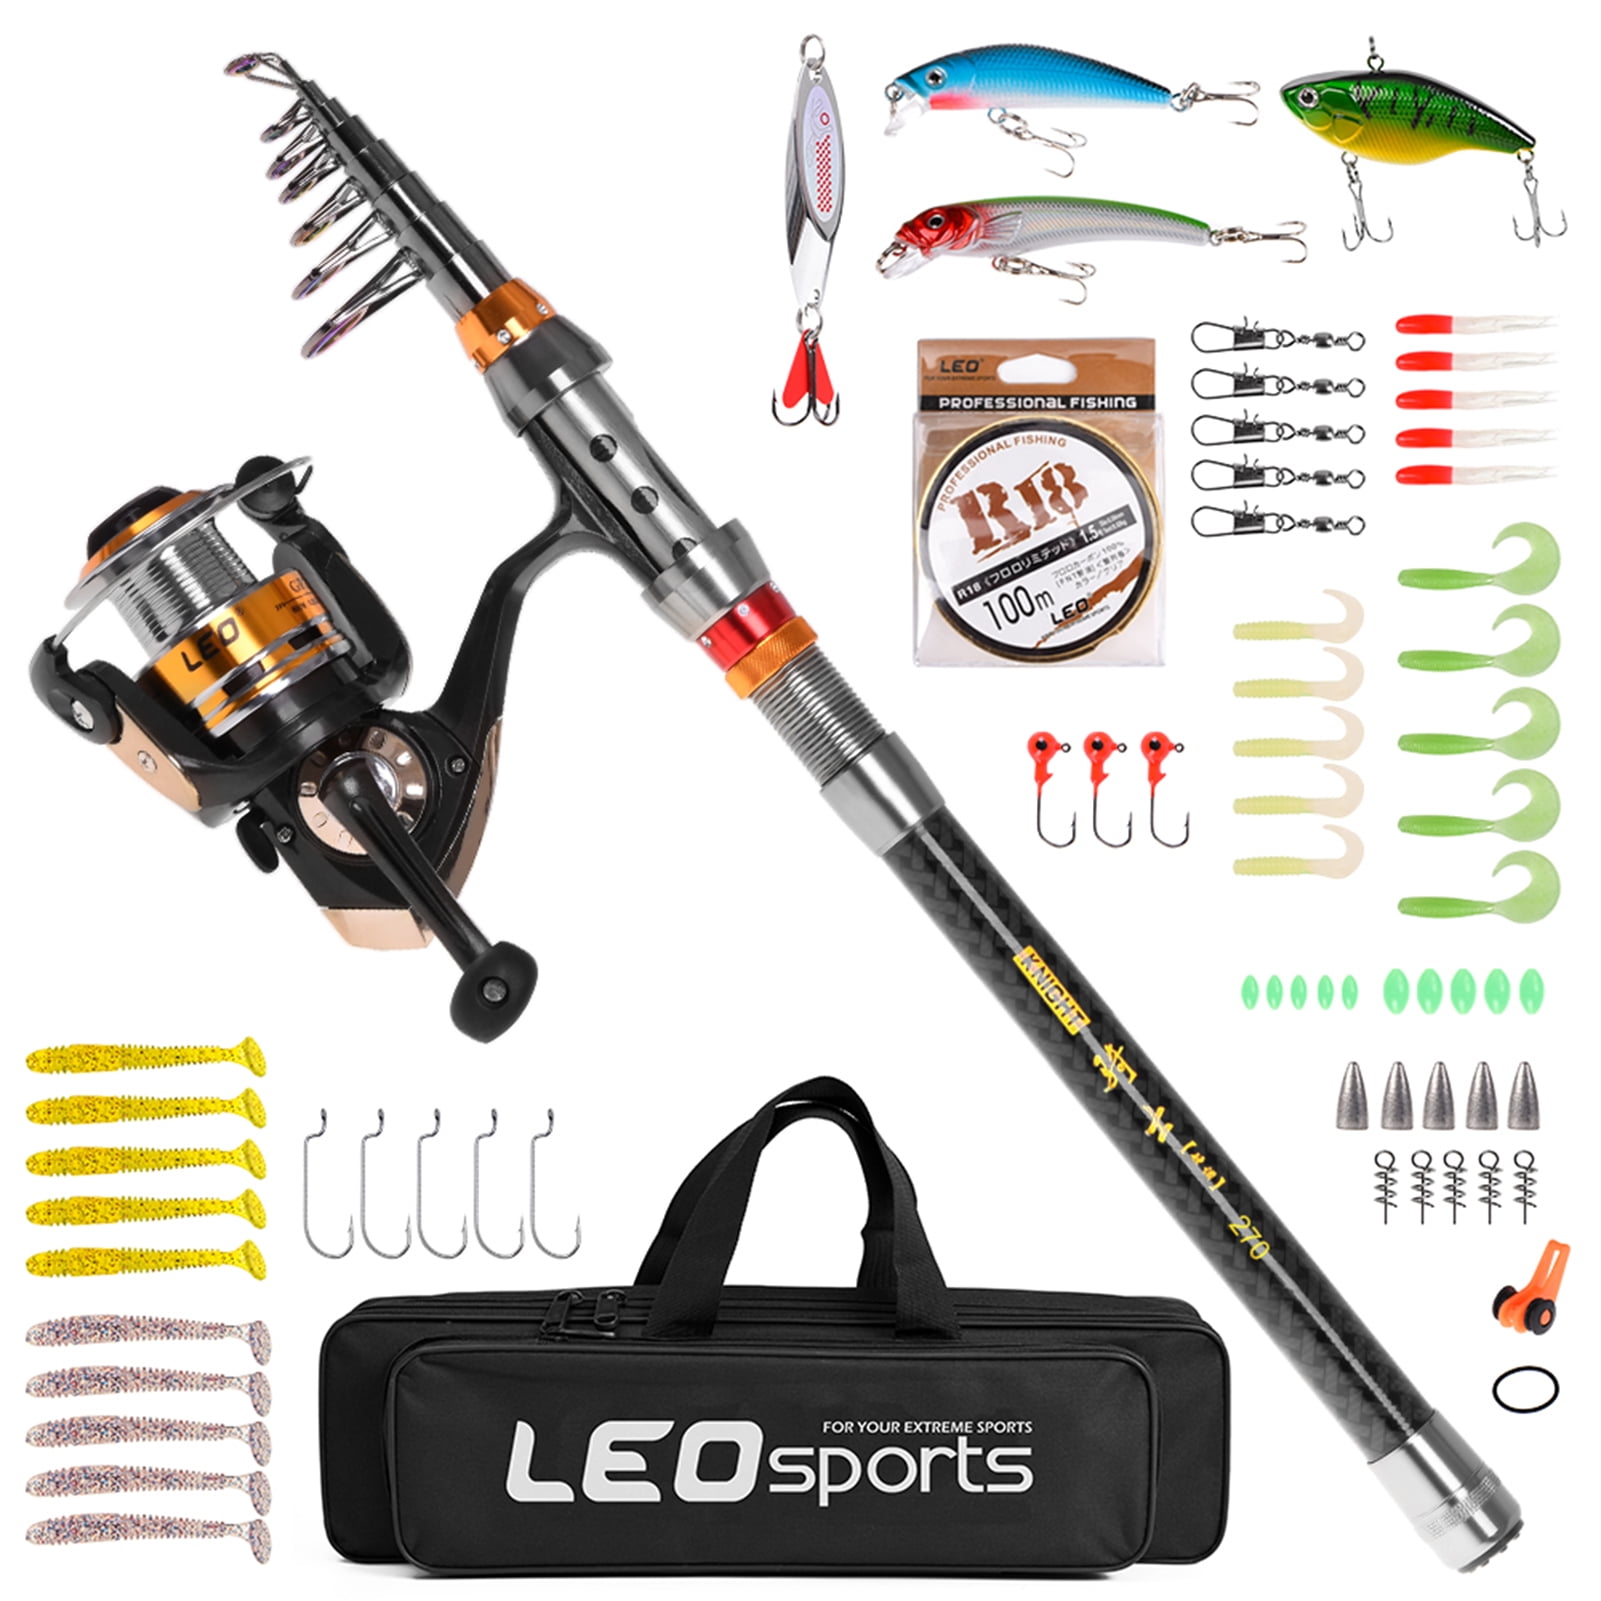 Carbon Fiber Telescopic Fishing Rod & Spinning Reel Combo Kit With Fishing Line 